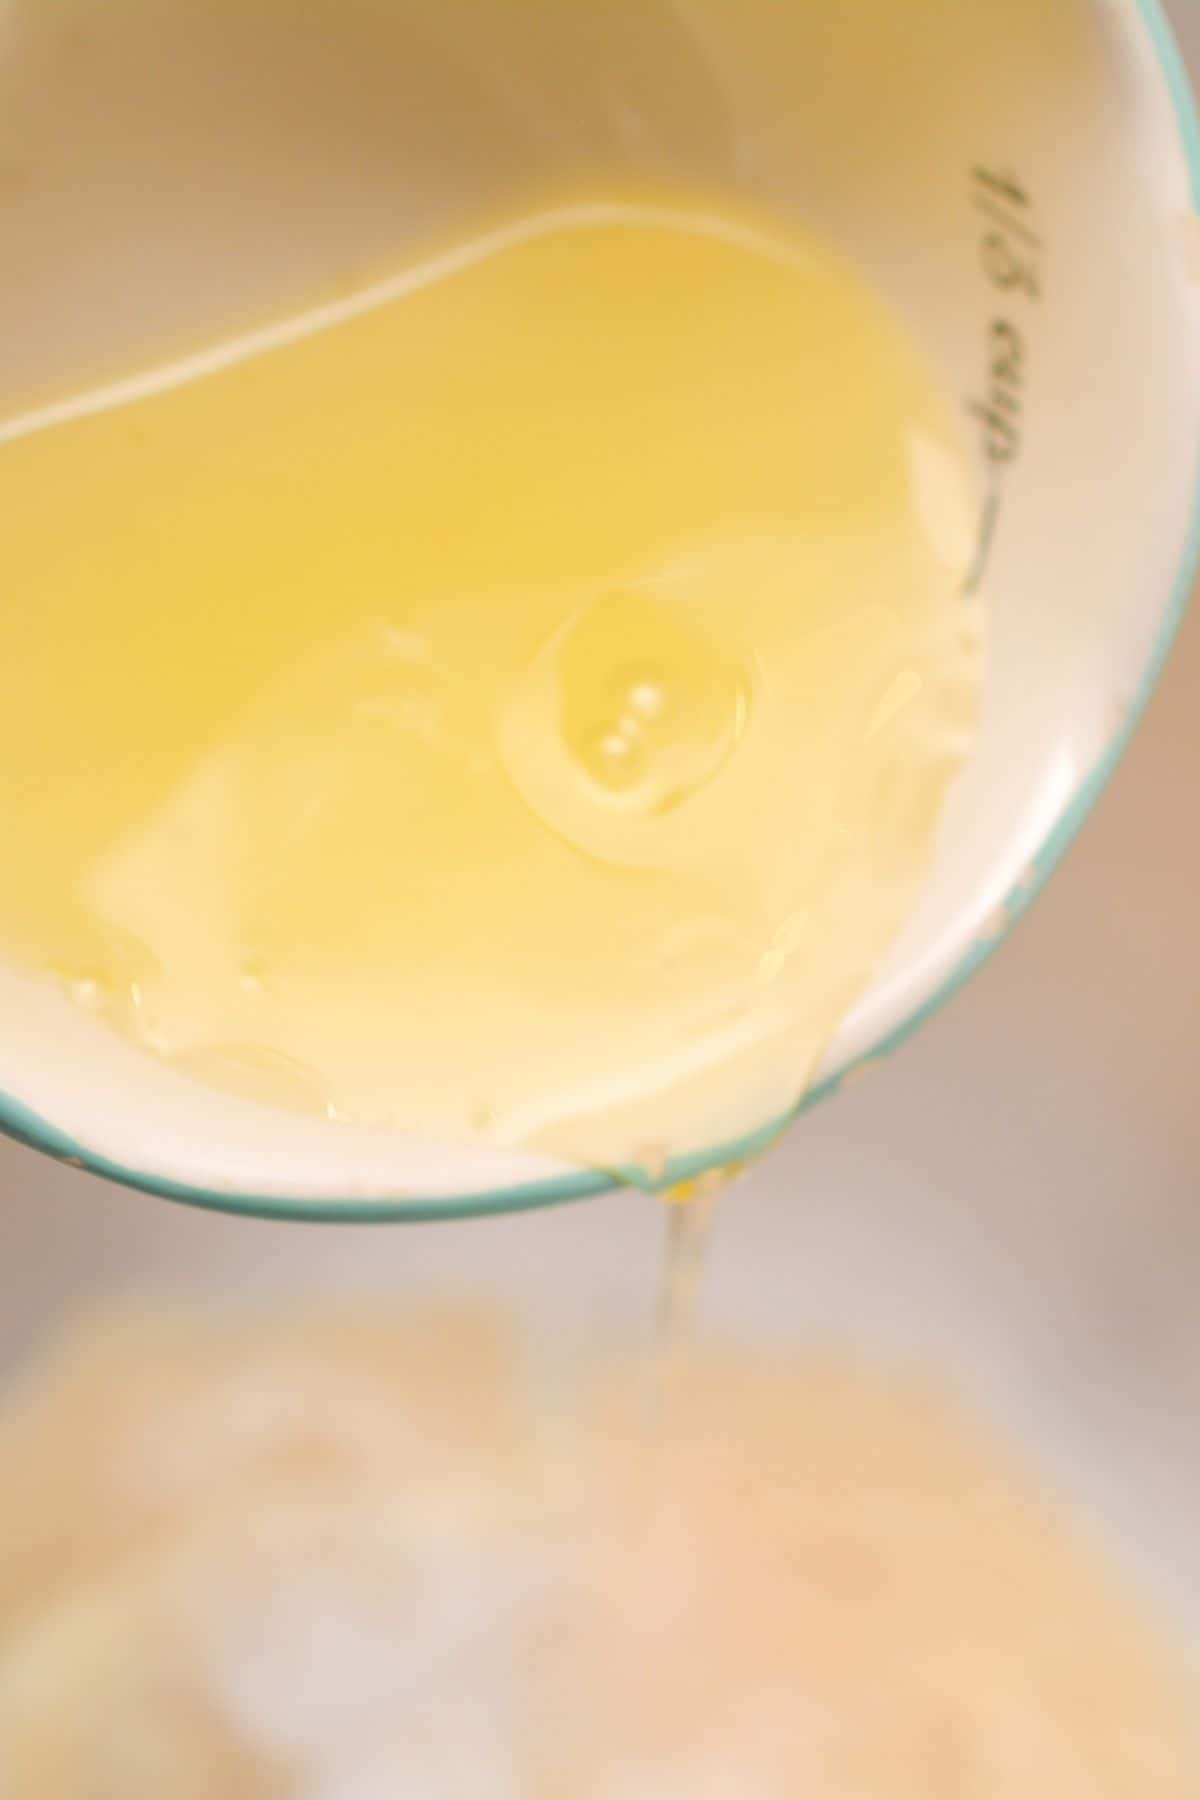 Egg white is being poured into a bowl.